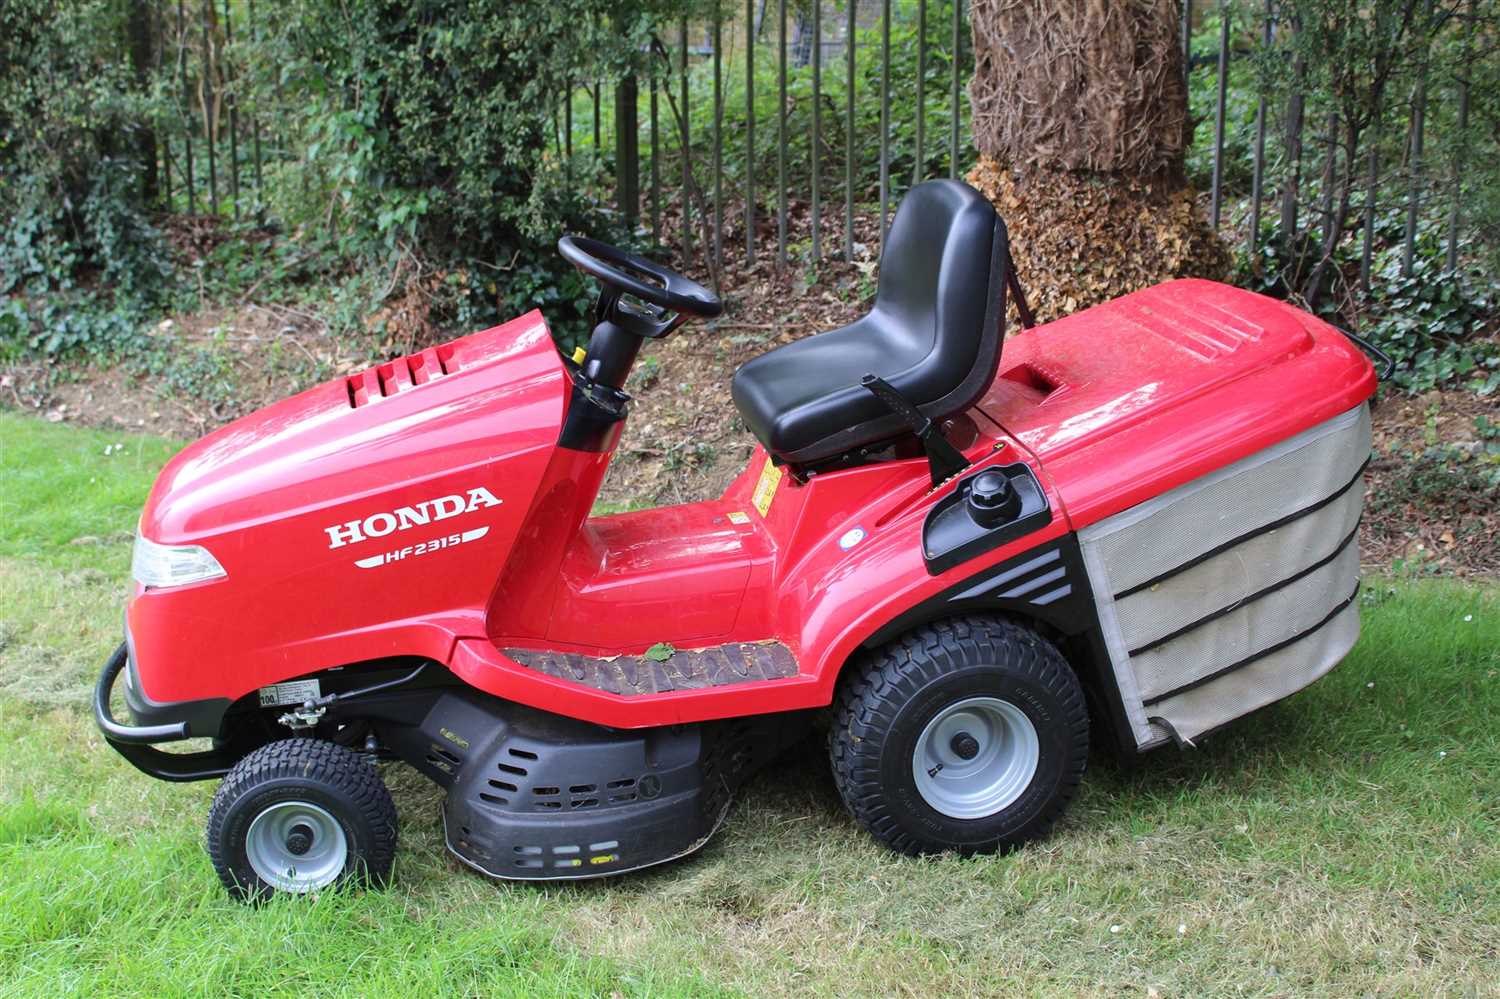 Lot 1 - Honda HF2315 ride on lawnmower / tractor, with 2 keys and manual, originally supplied new by Ernest Doe, Colchester and believed to be approx 1 year old